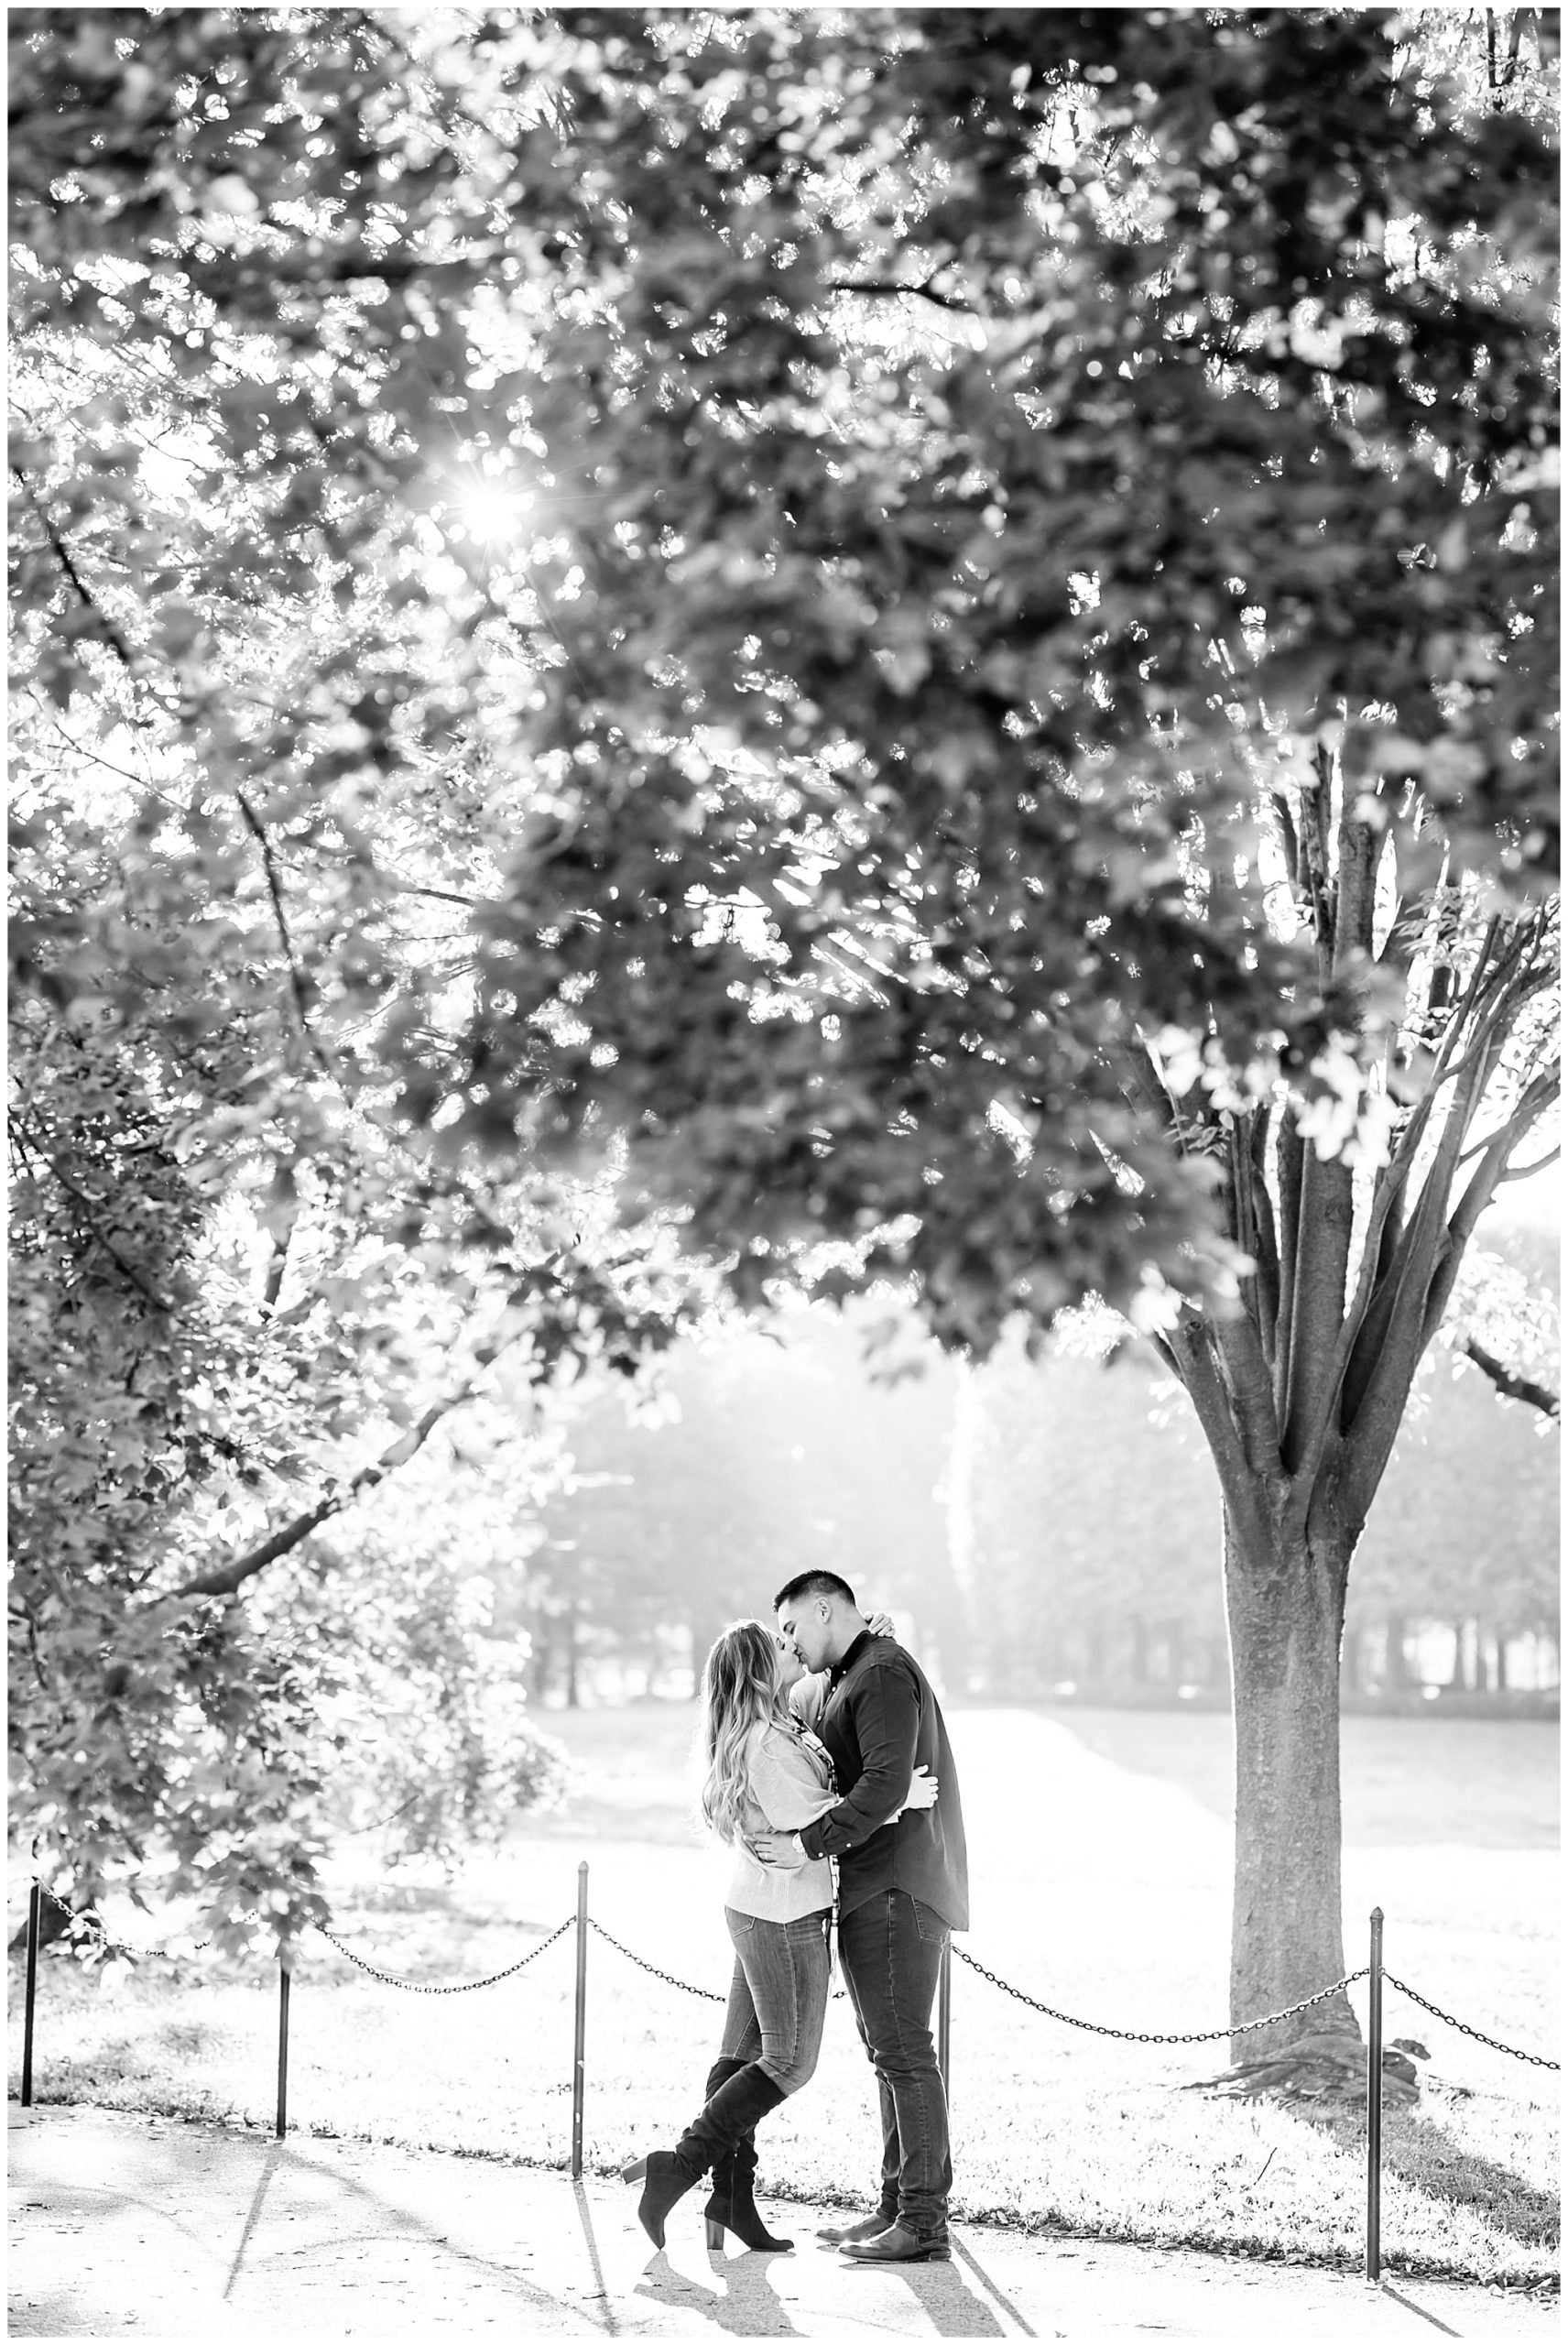 autumn National Mall portraits, autumn portraits, National Mall DC, DC photographer, National Mall photos, autumn photos, couple portraits, DC landmarks, DC portraits, DC couples photographer, Rachel E.H. Photography, morning magic hour, black and white portrait, couple kissing